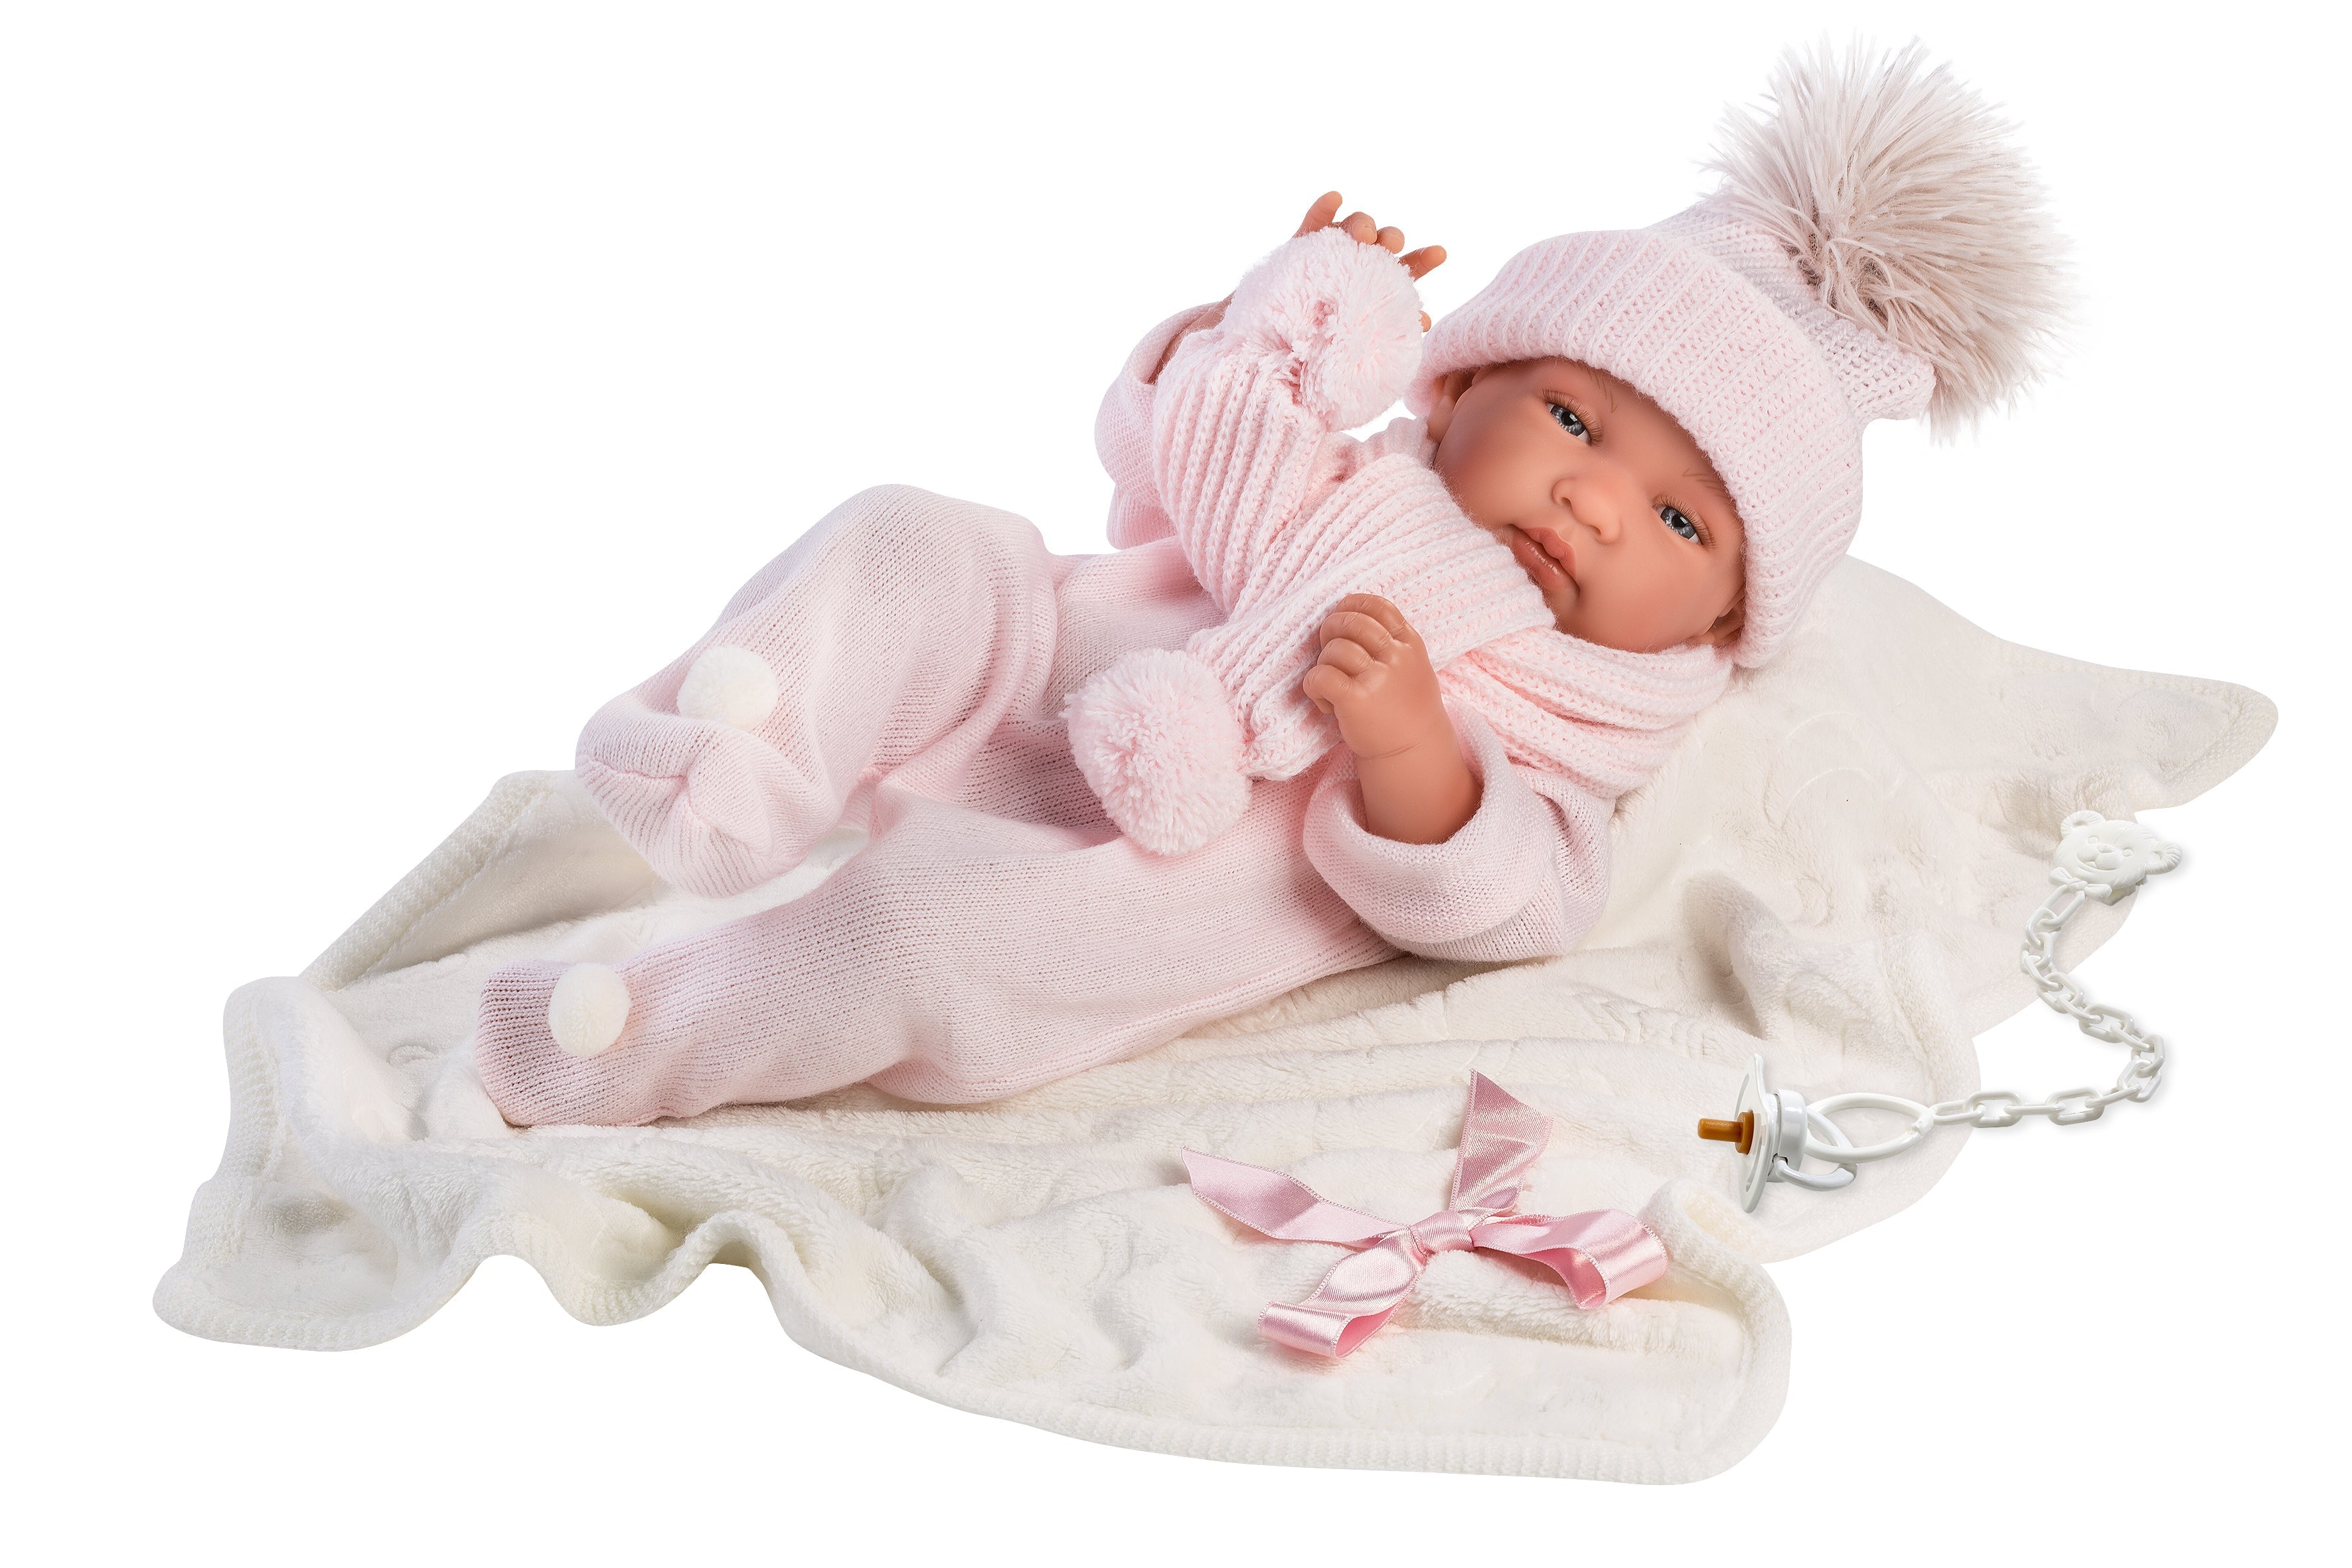 Llorens 17" Anatomically-correct Baby Doll Jill With Blanket Dolls